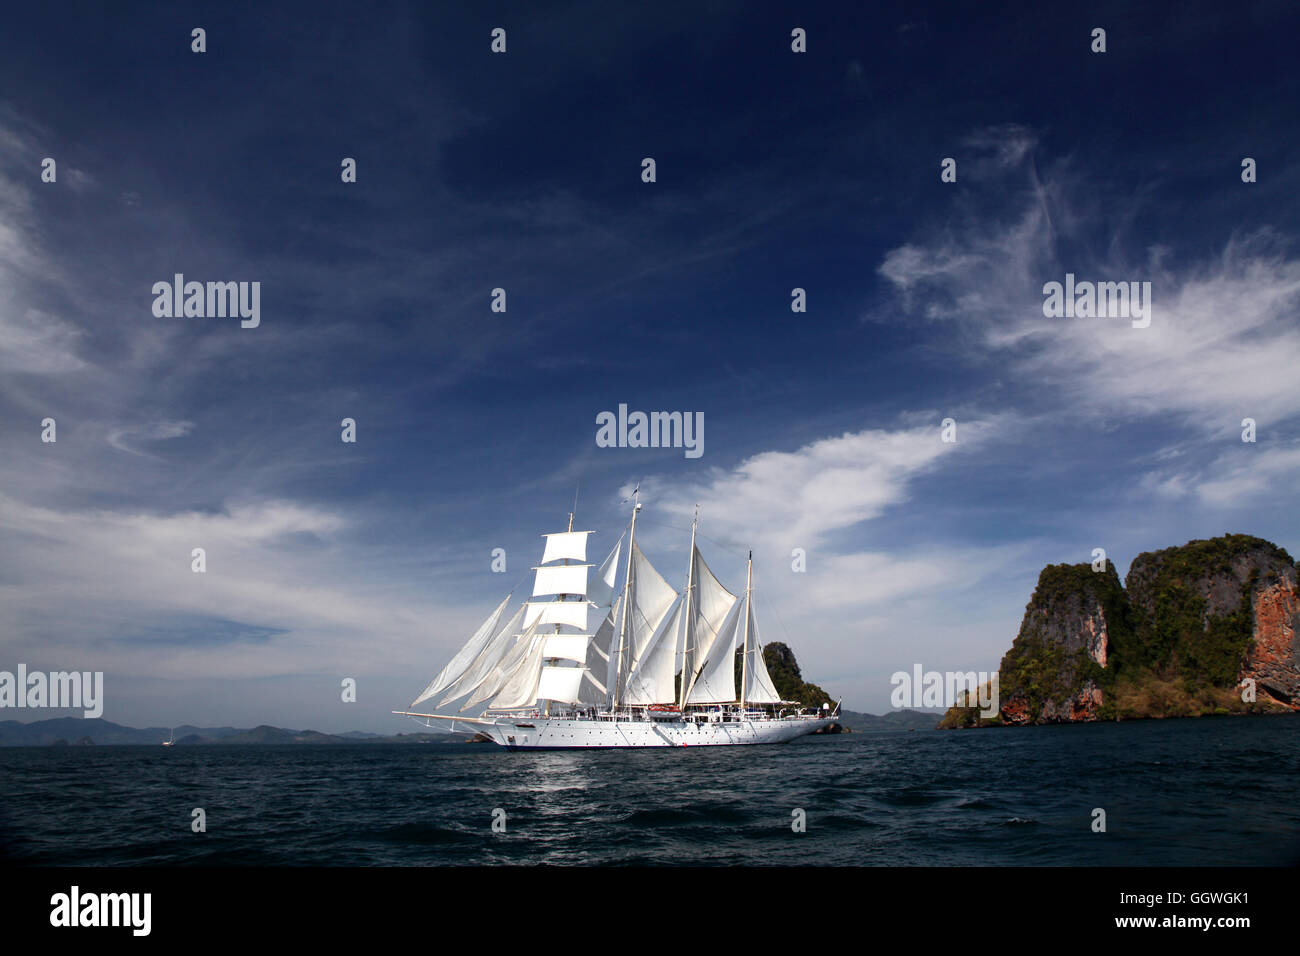 A clipper ship under full sail in the Andaman sea, Thailand Stock Photo